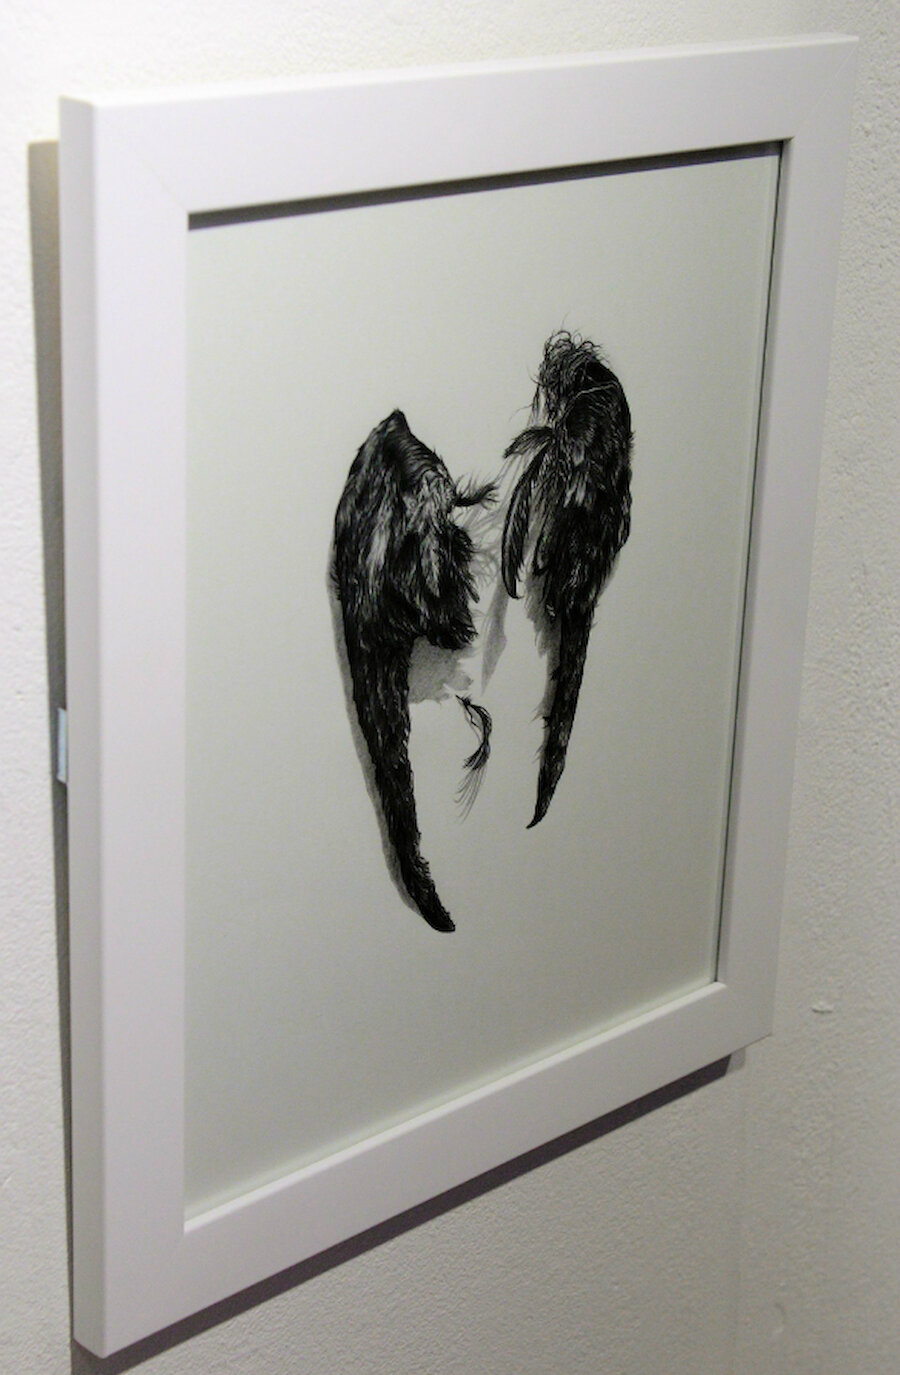 Aimee Labourne's finely-wrought depiction of a Storm Petrel's wings.